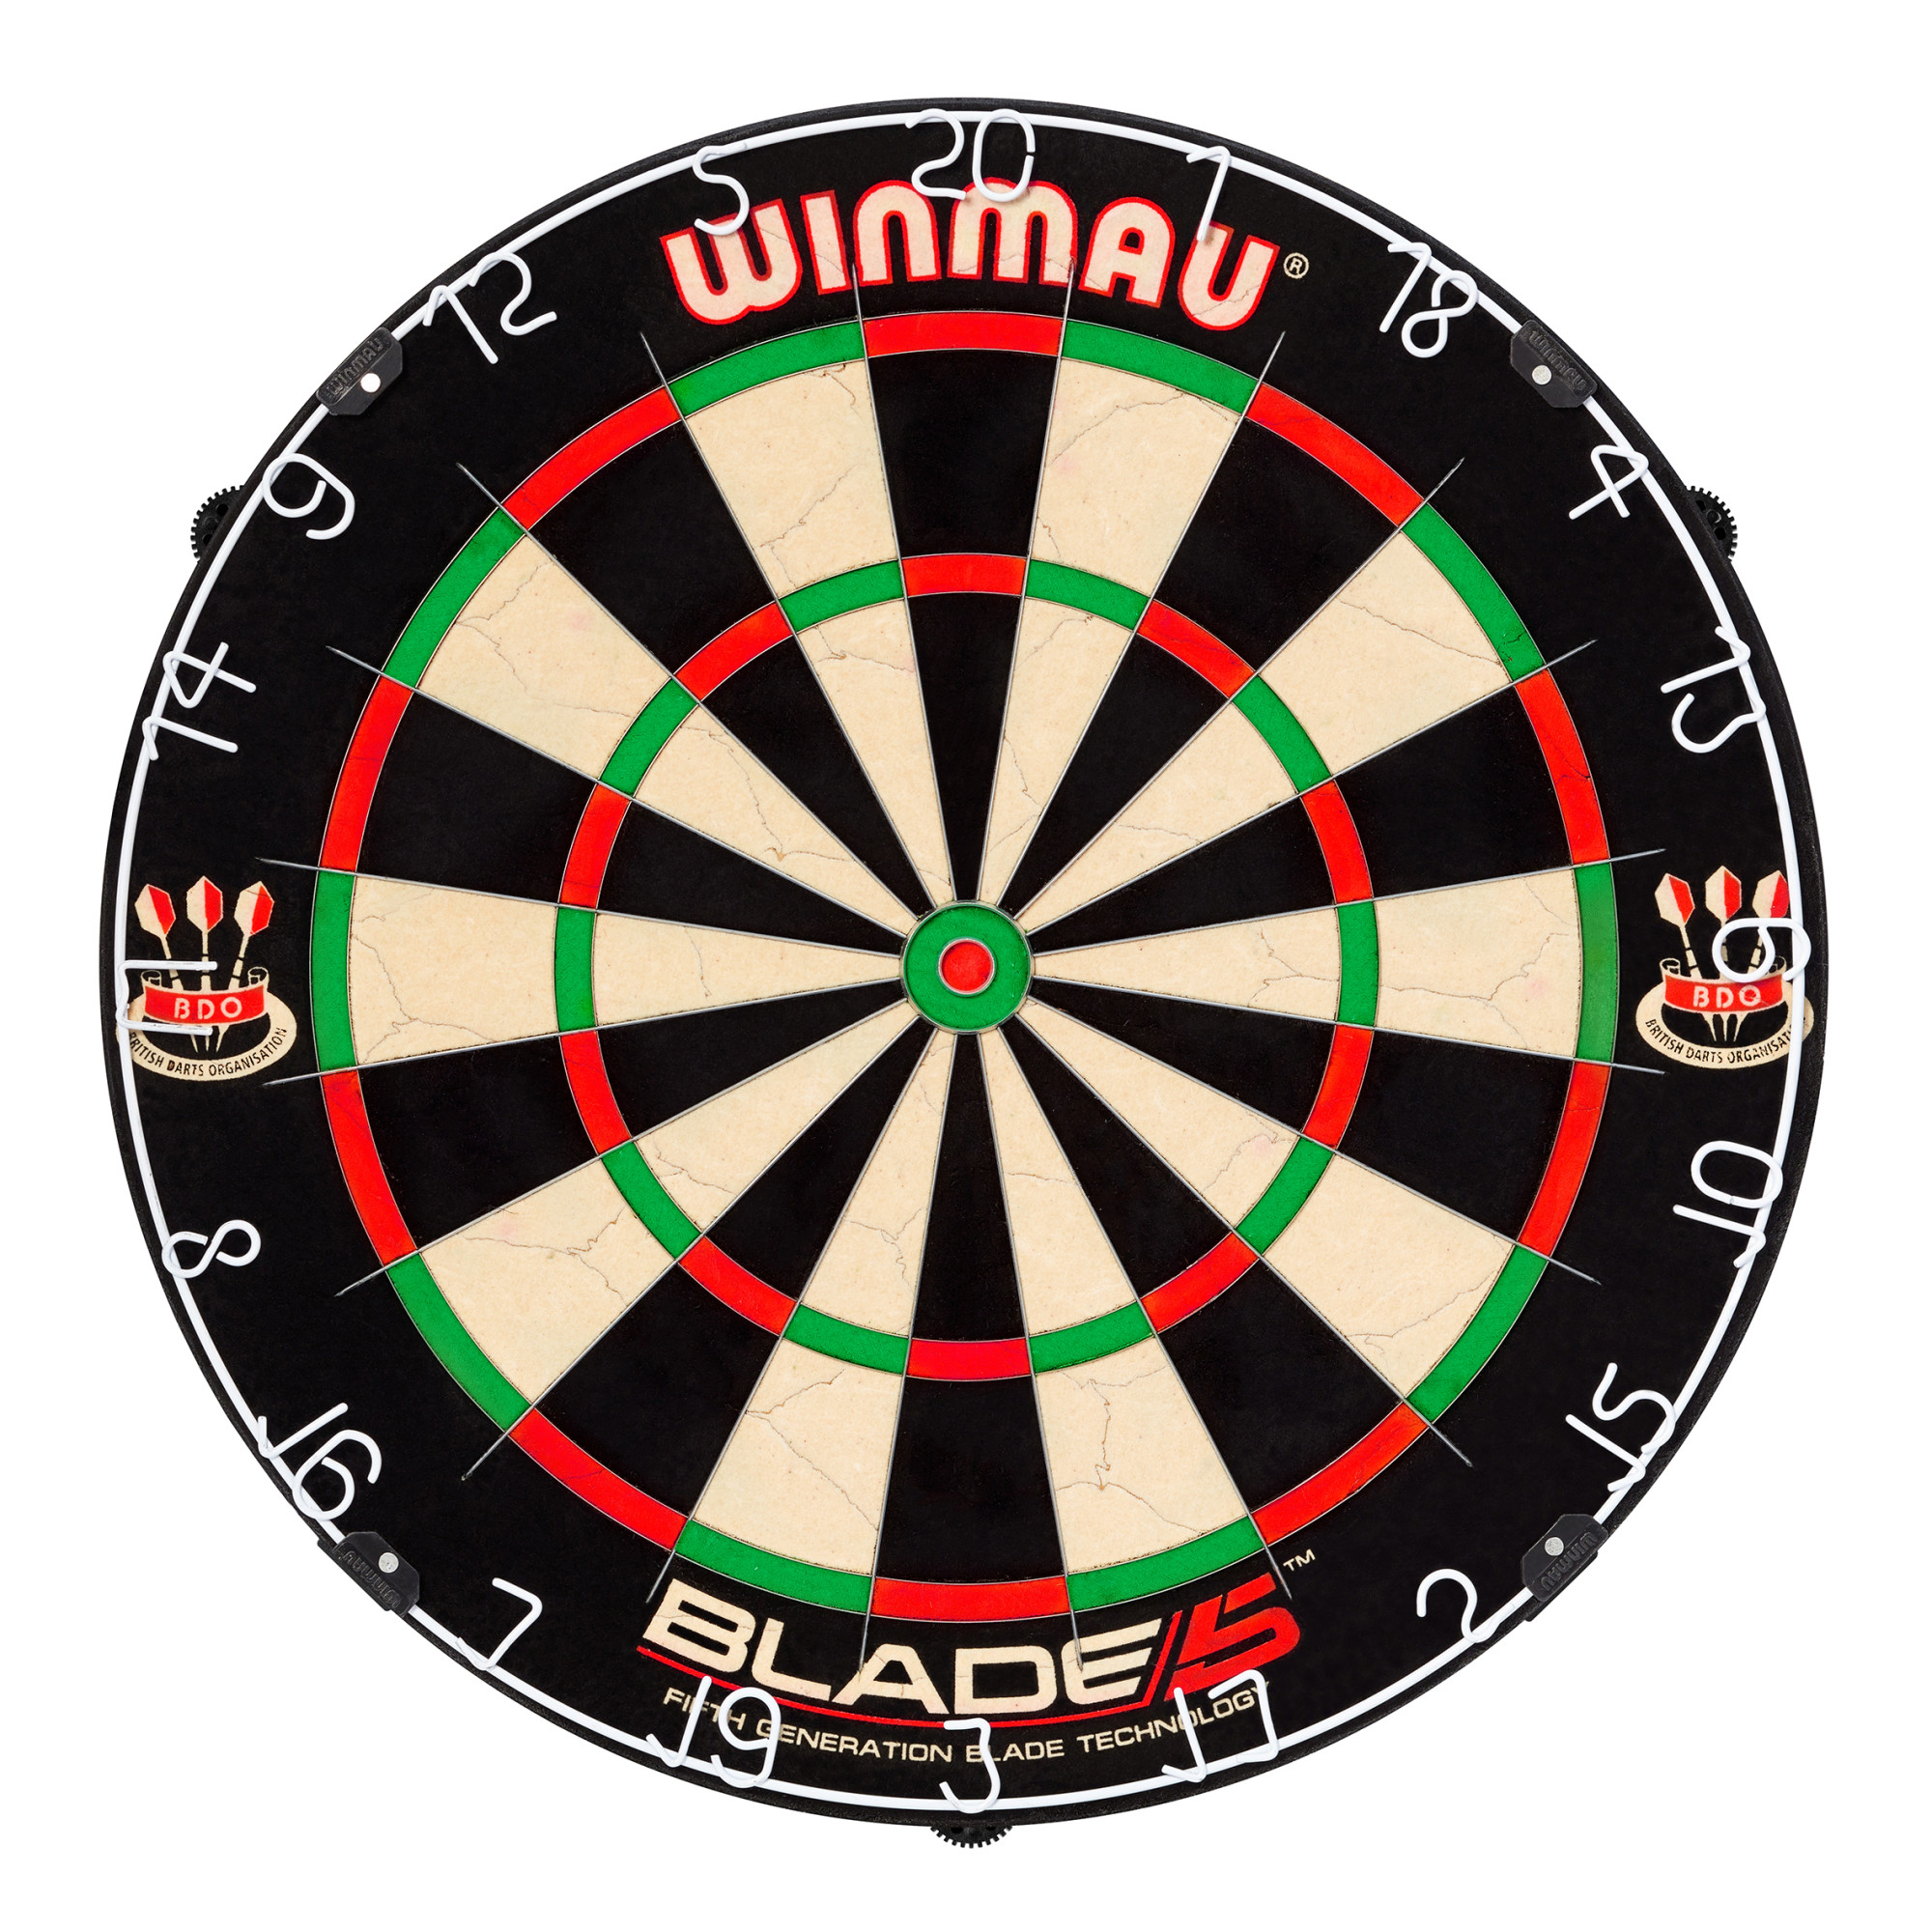 Winmau Darts Blade 5 Bristle Dartboard with All-New Thinner Wiring for Higher Scoring and Reduced Bounce-Outs - image 1 of 10